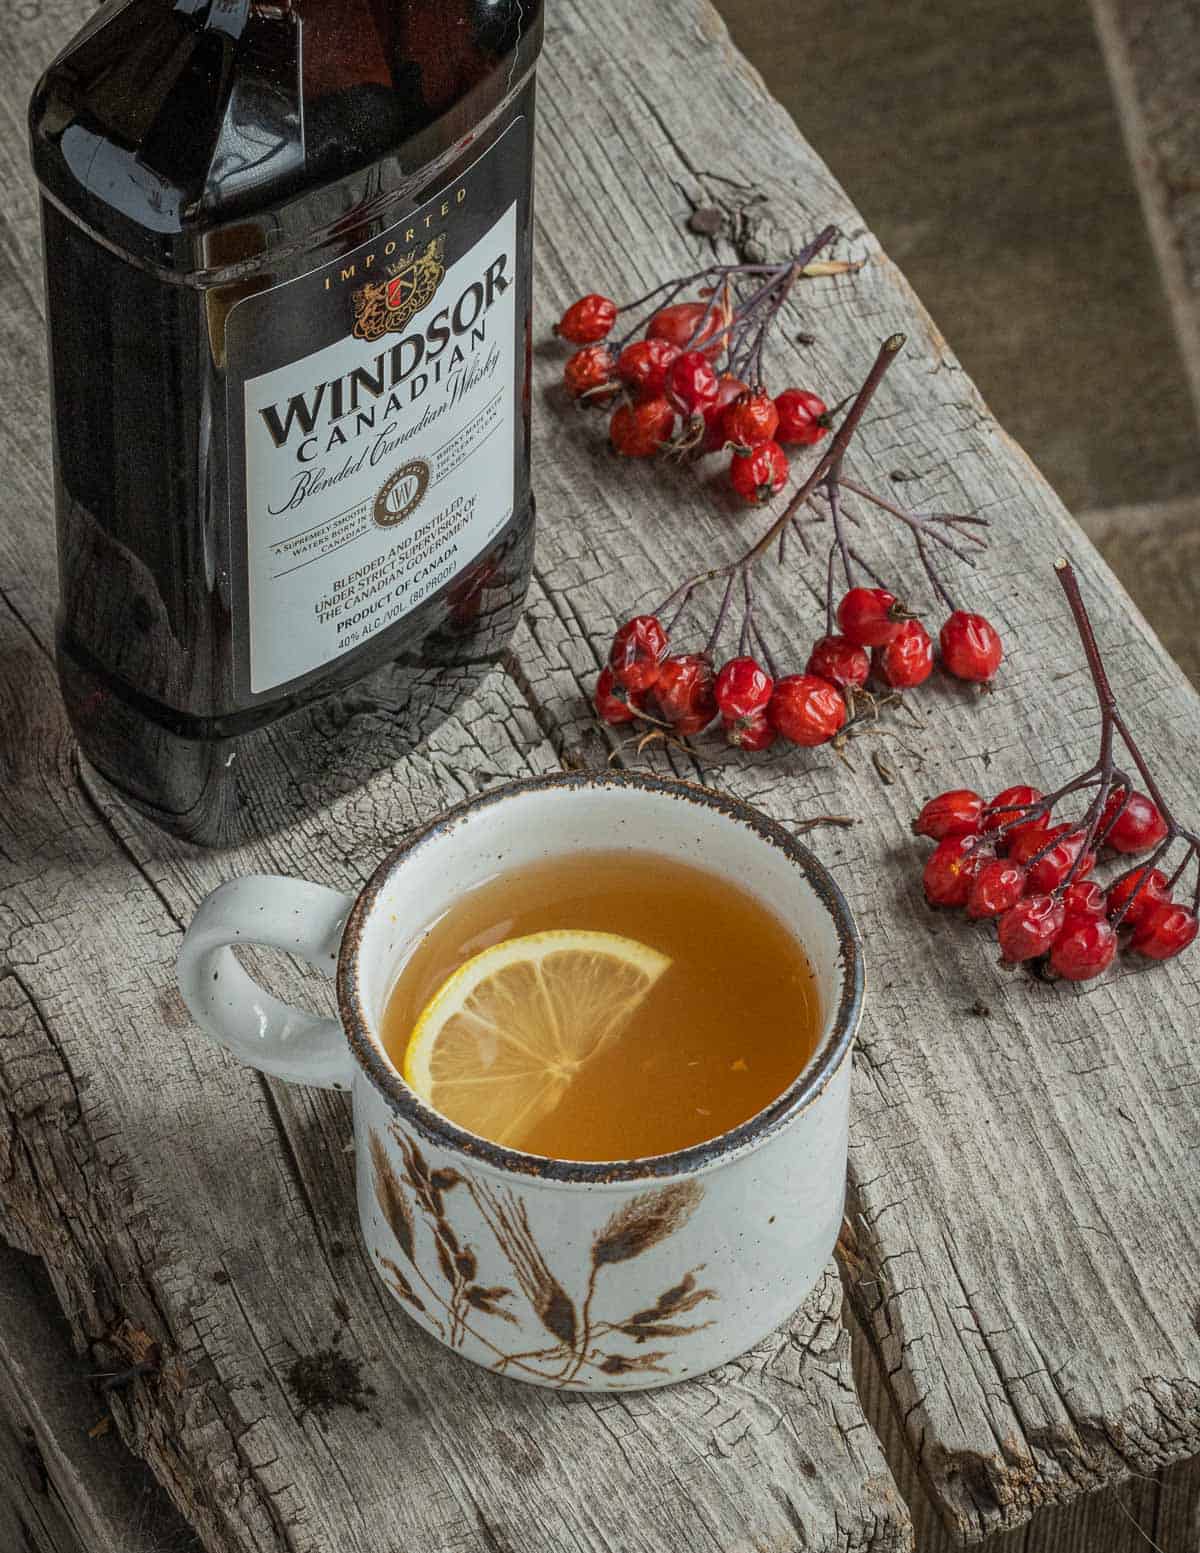 A rosehip hot toddy in a ceramic mug with wheat on it next to a bottle of windsor whiskey and fresh clusters of wild rose hips. 